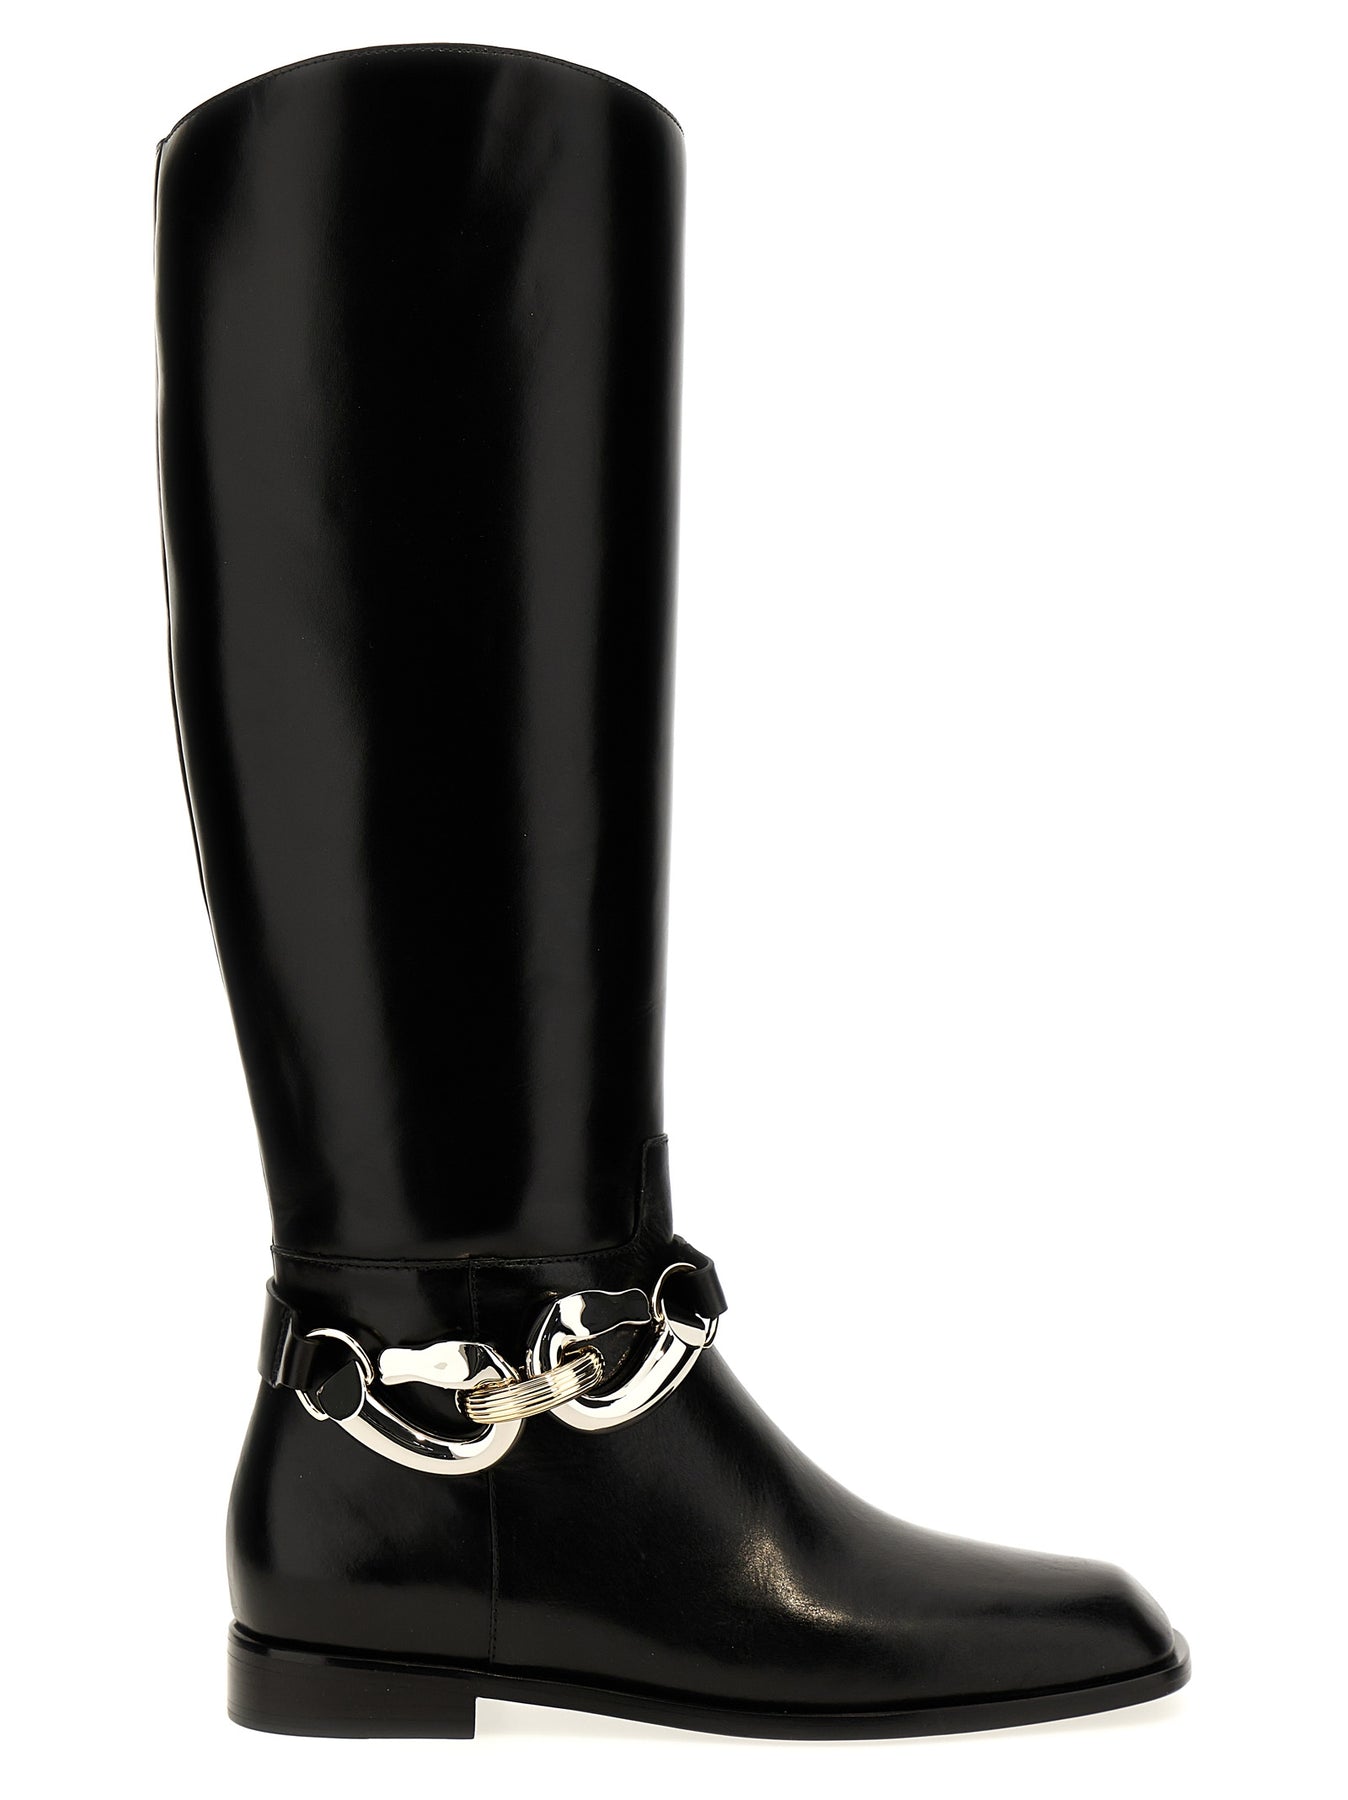 Shop Tory Burch Jessa Riding Boot Boots, Ankle Boots